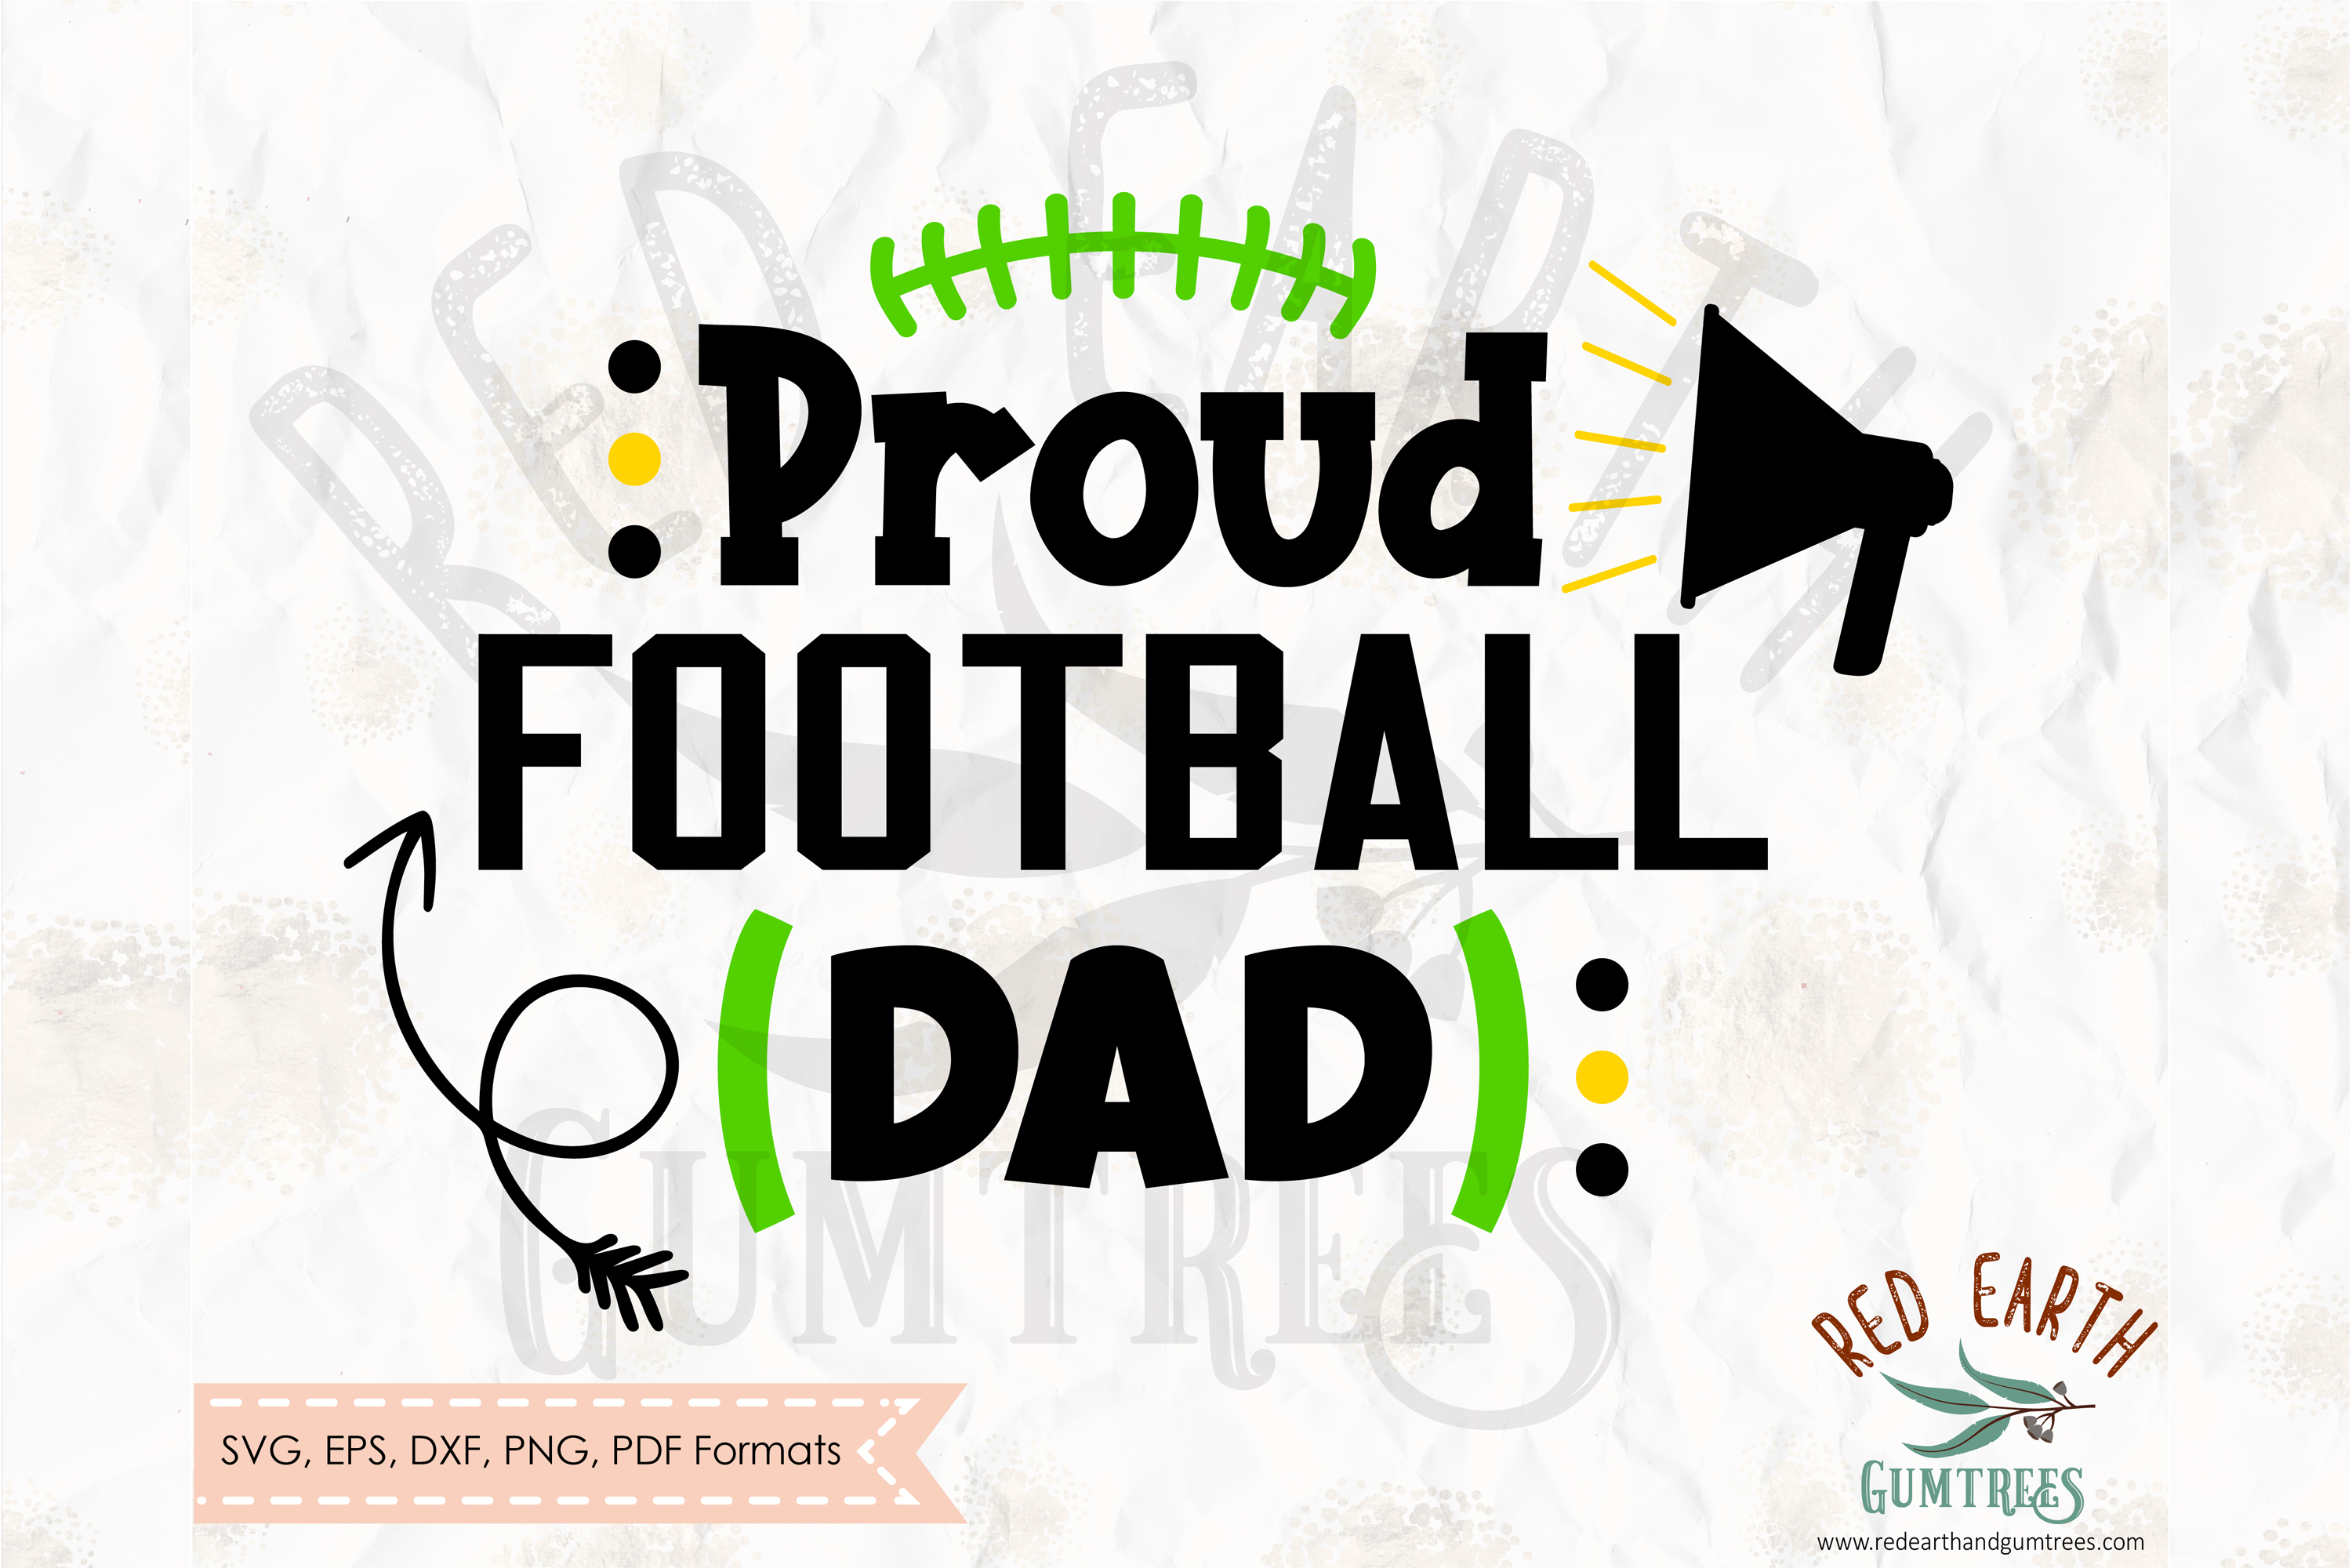 Download Proud football dad, football, in SVG, DXF, PNG, EPS, PDF